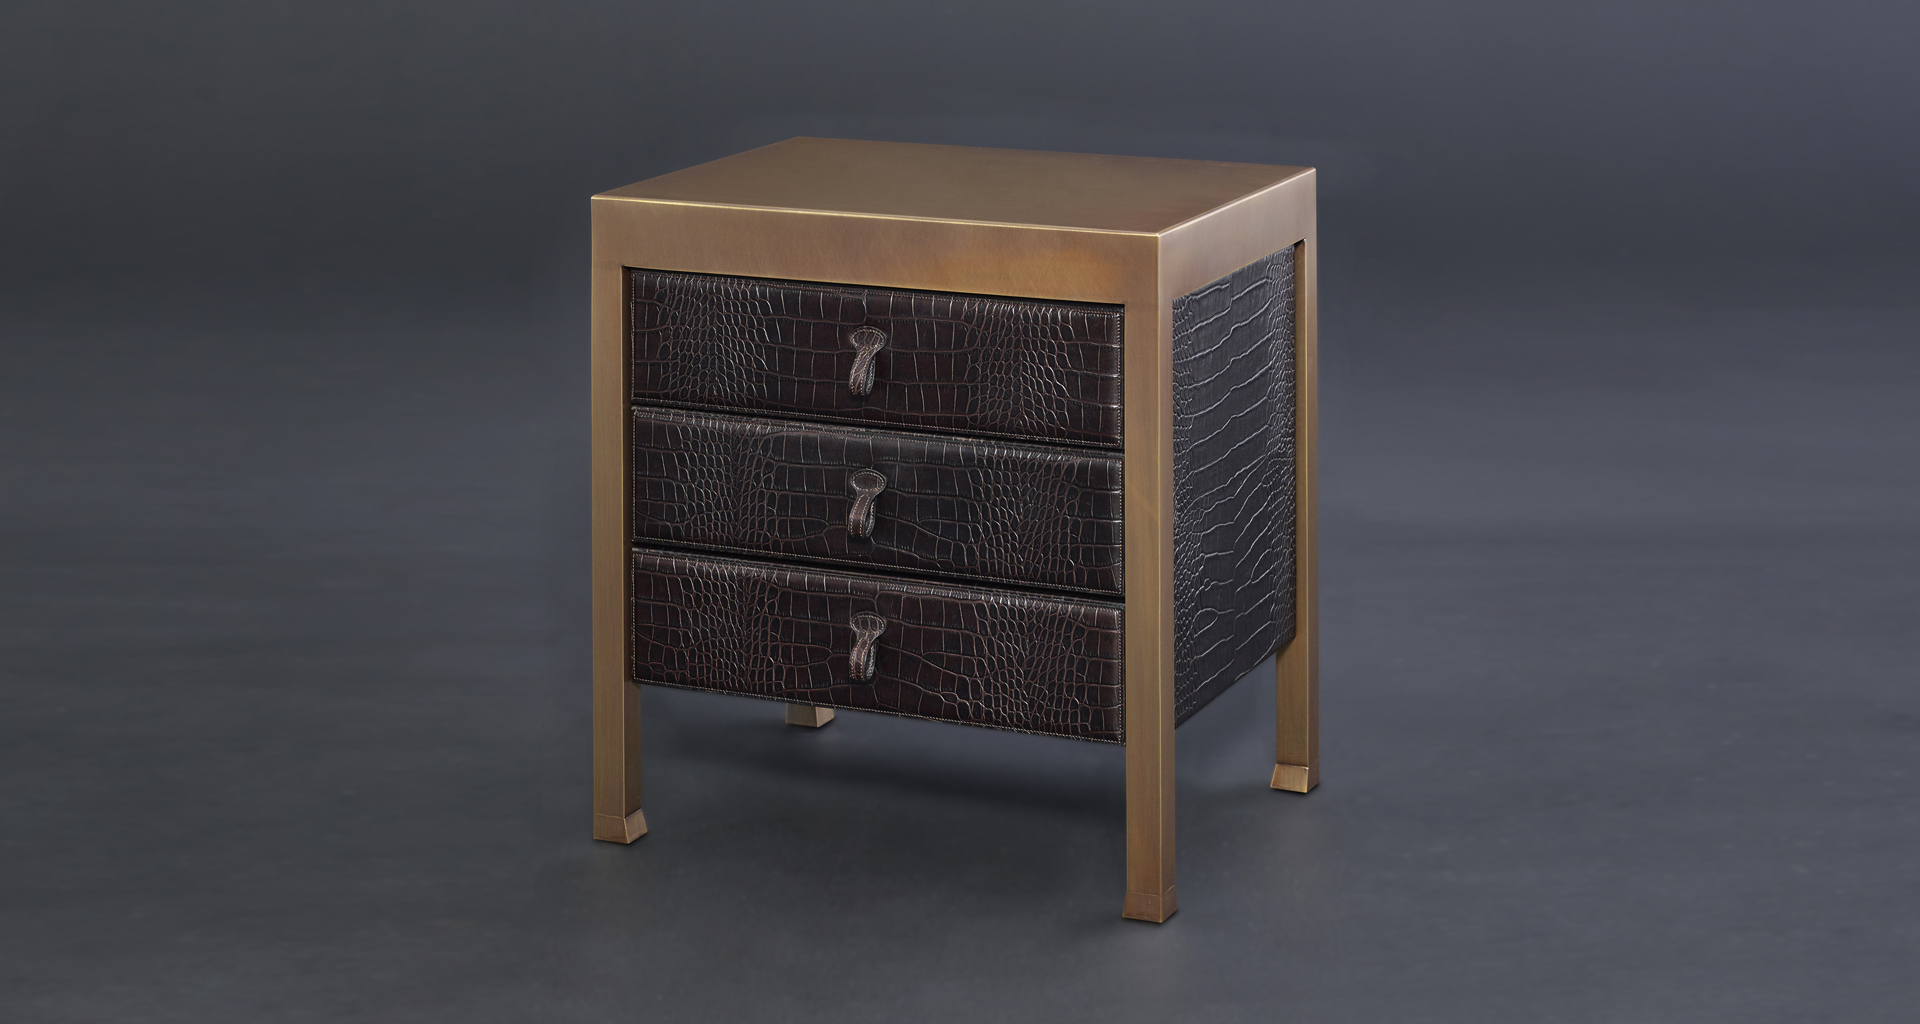 Gong is a bronze bedside table that can be covered in fabric or leather, from the Promemoria's catalogue | Promemoria